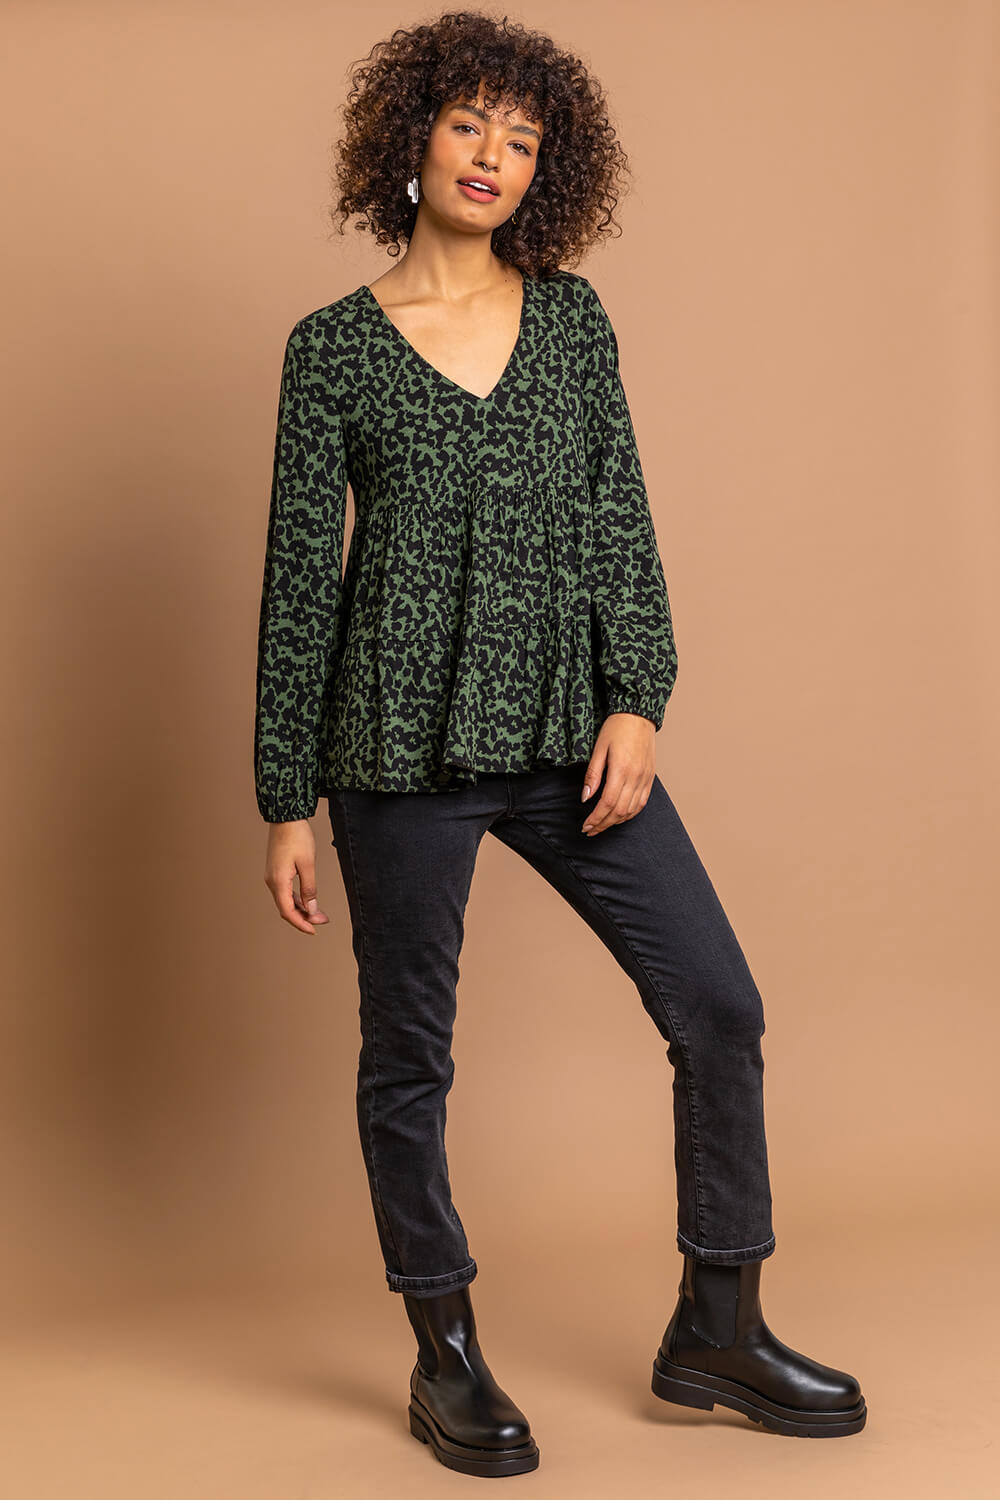 Green Animal Print V Neck Tiered Top, Image 3 of 5